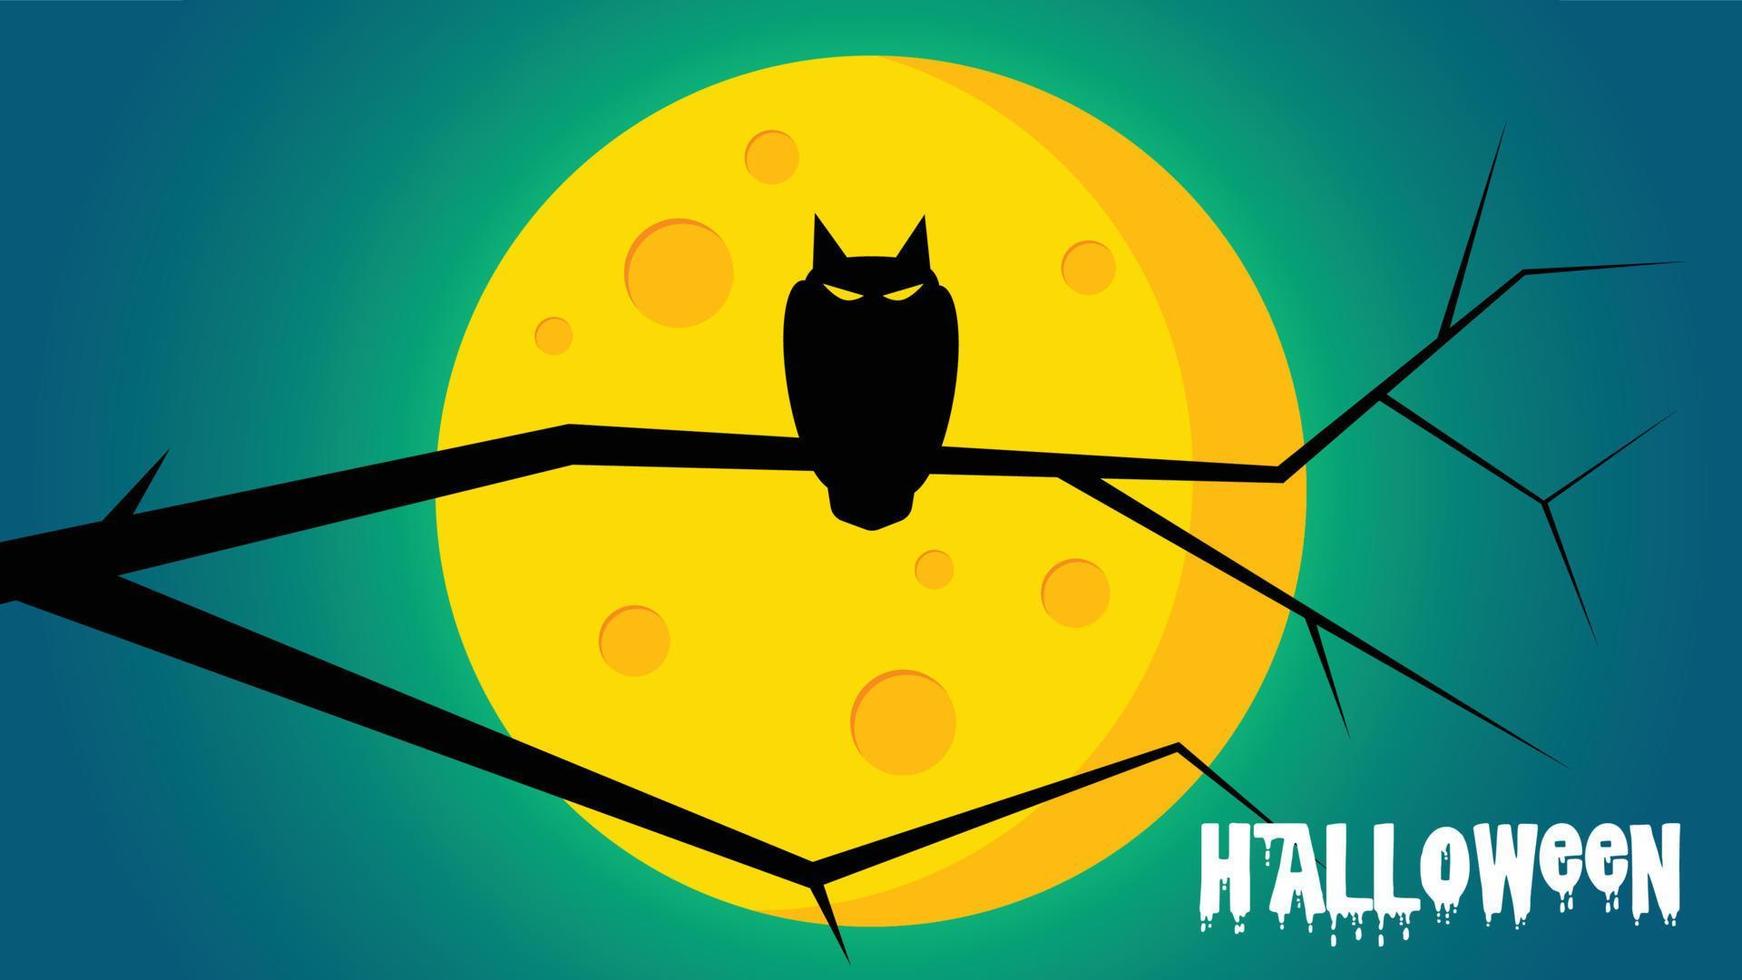 Halloween's day background - A owl on stick front the moon vector